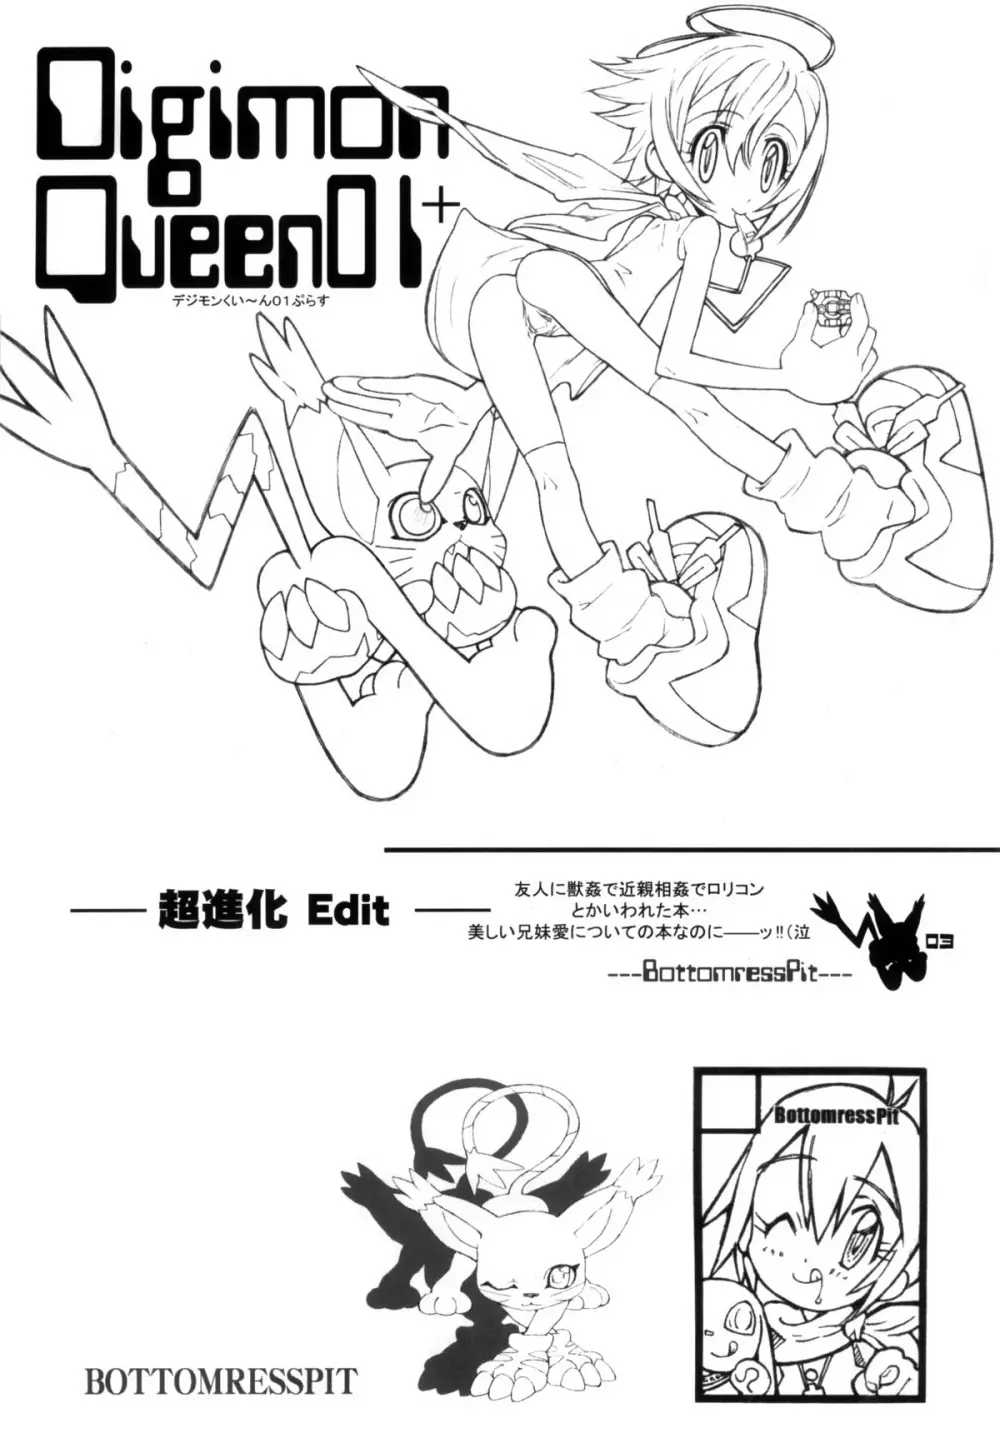 Digimon Queen 01+ Page.3